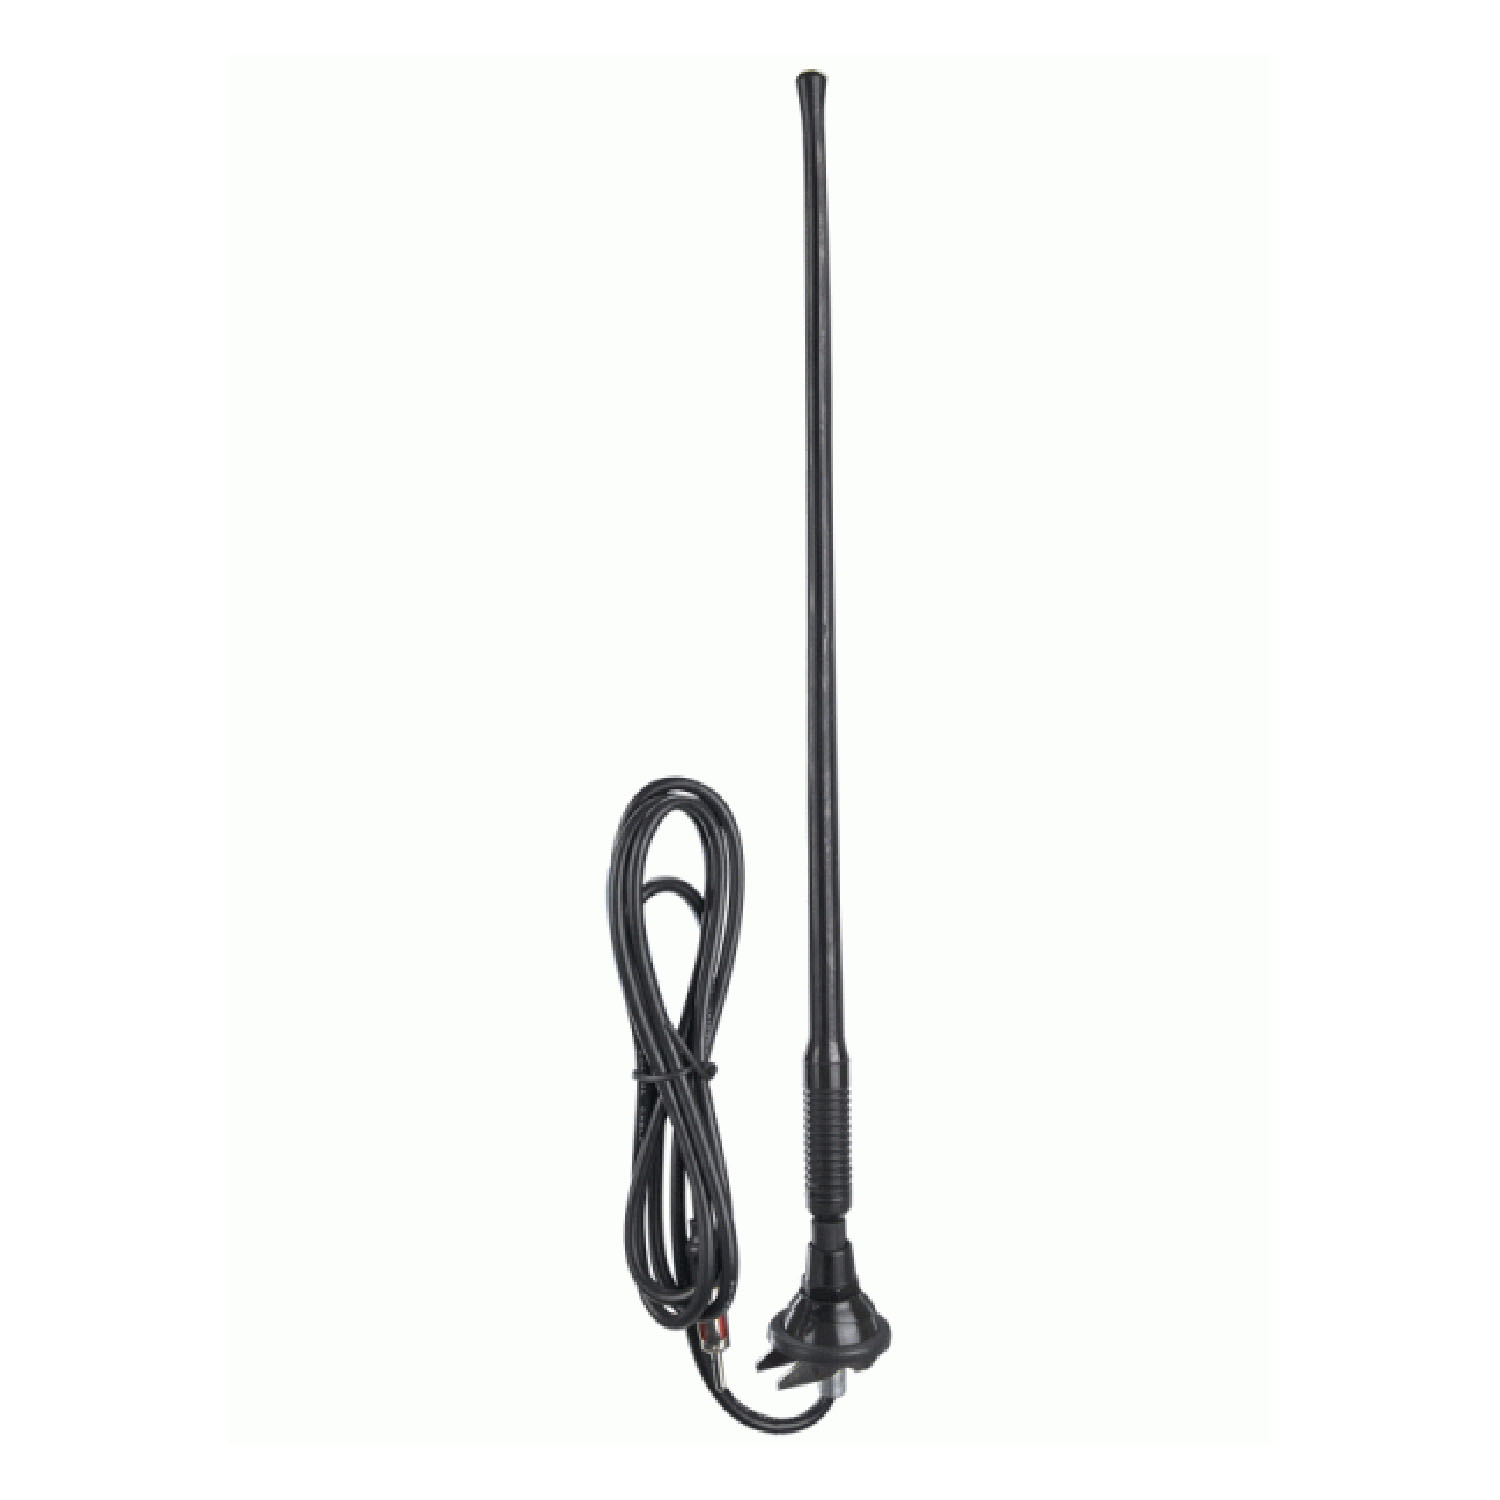 METRA 44UT06R UNIVERSAL TOP MOUNT 14" TALL BLACK RUBBER AM/FM ANTENNA WITH 54" CABLE